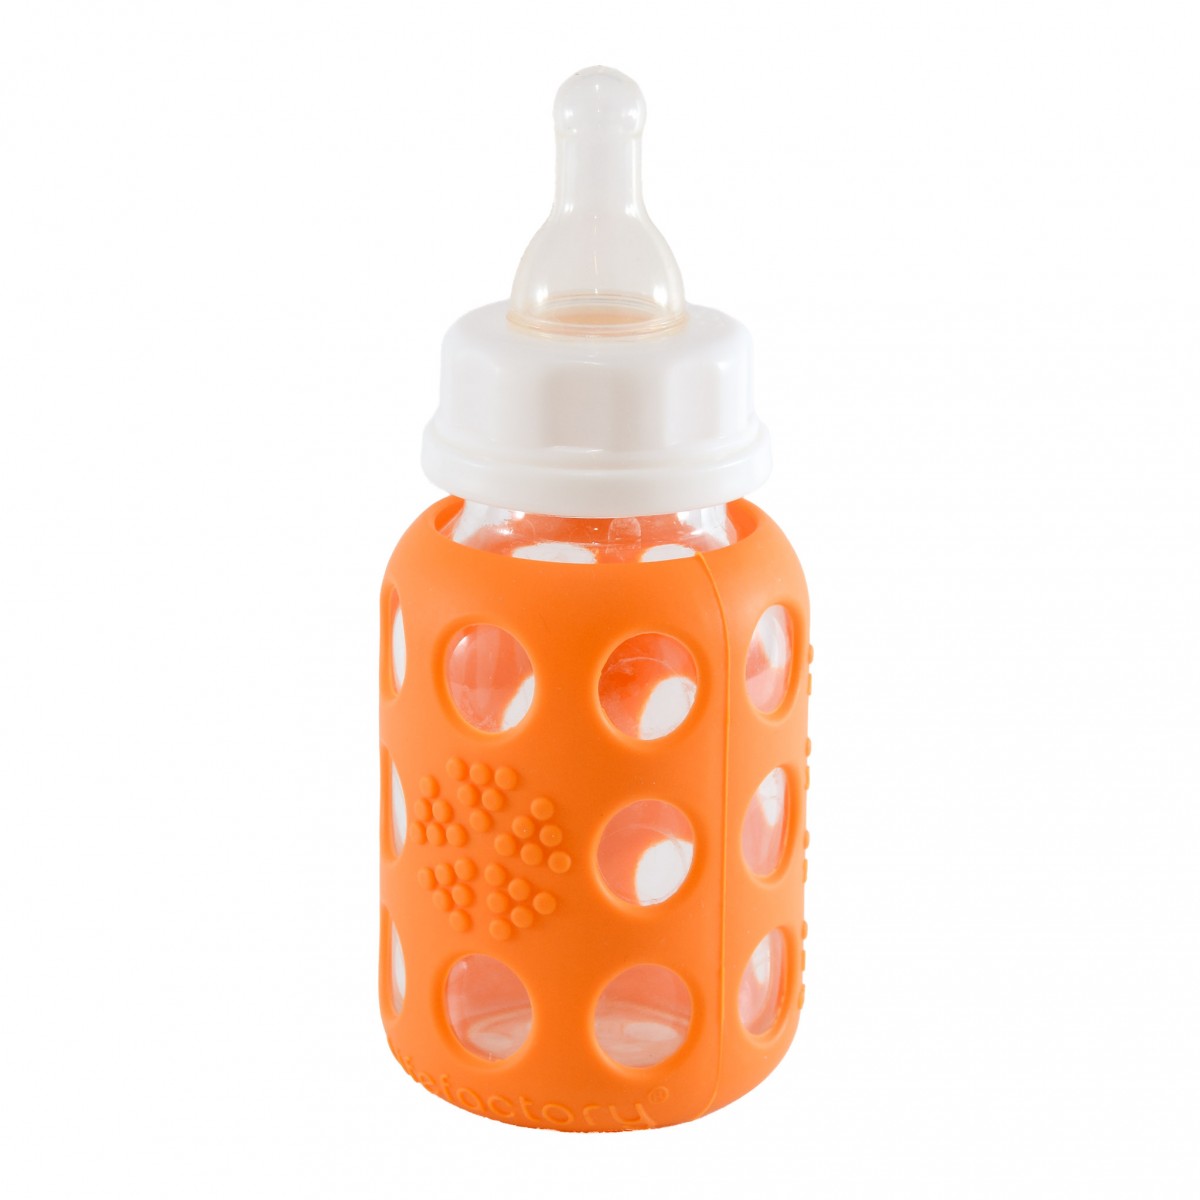 Lifefactory 8 oz. Stainless Steel Baby Bottle